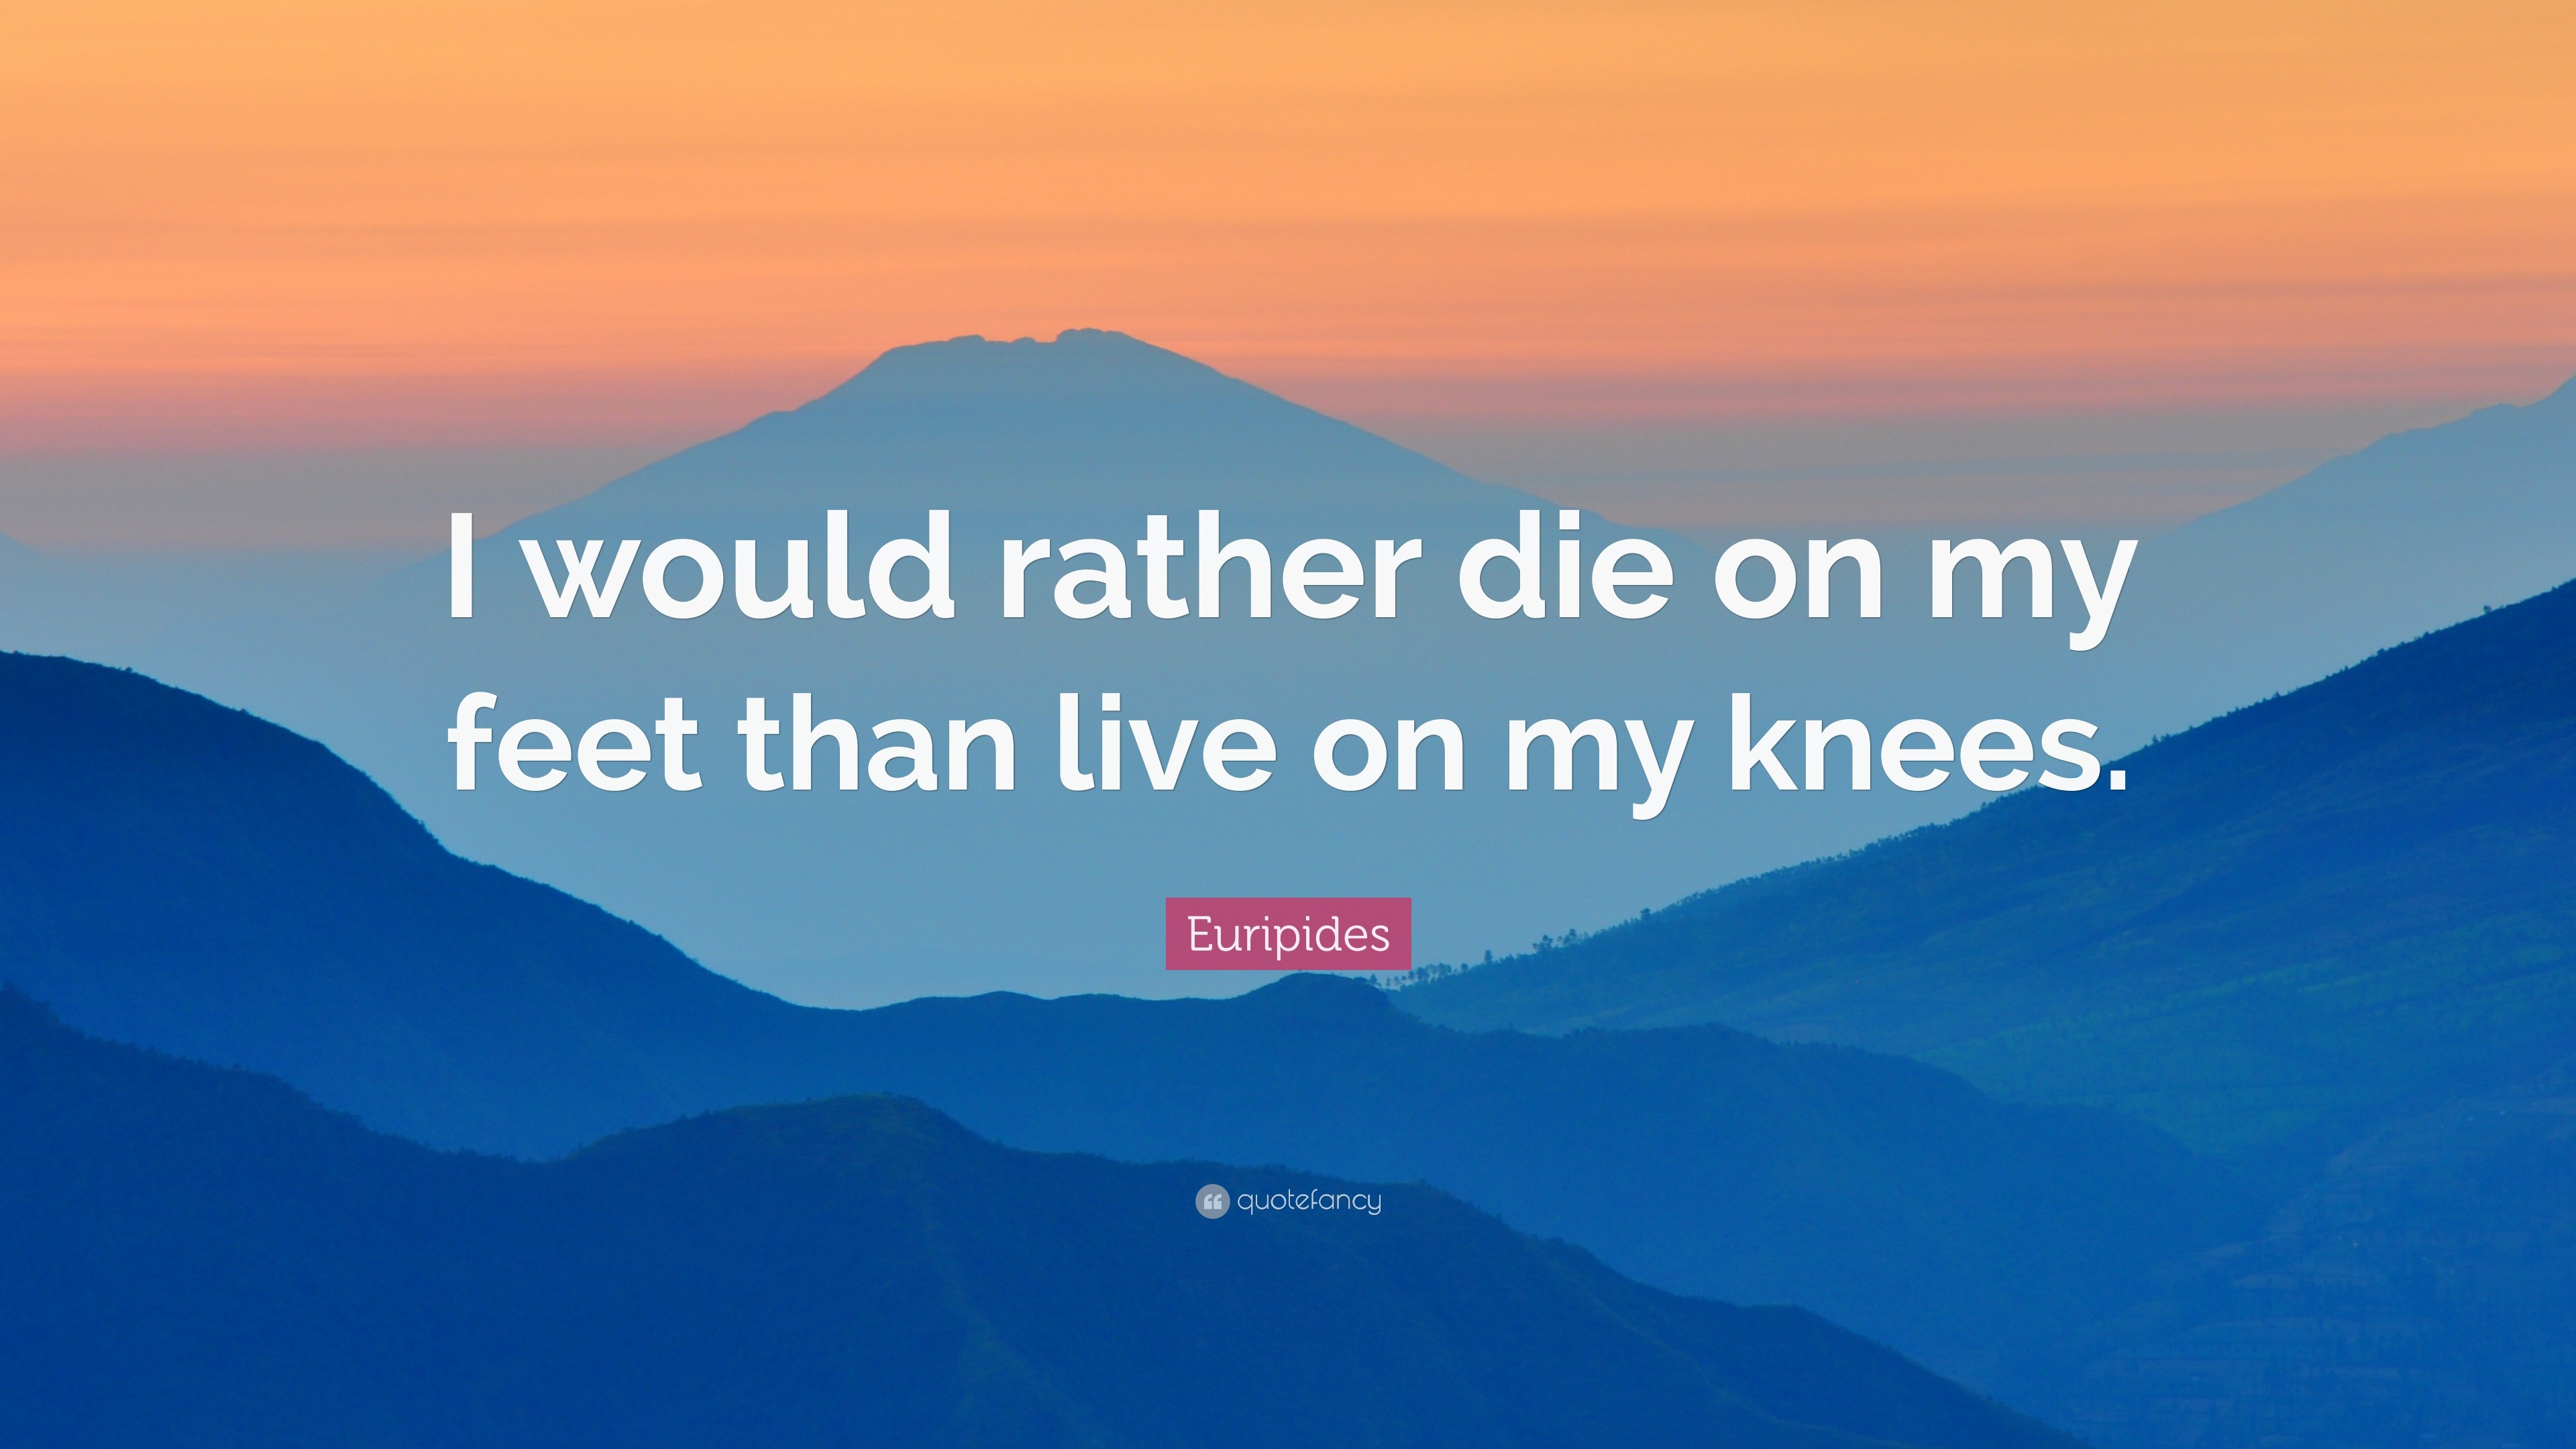 Euripides Quote: “I would rather die on my feet than live on my knees.”